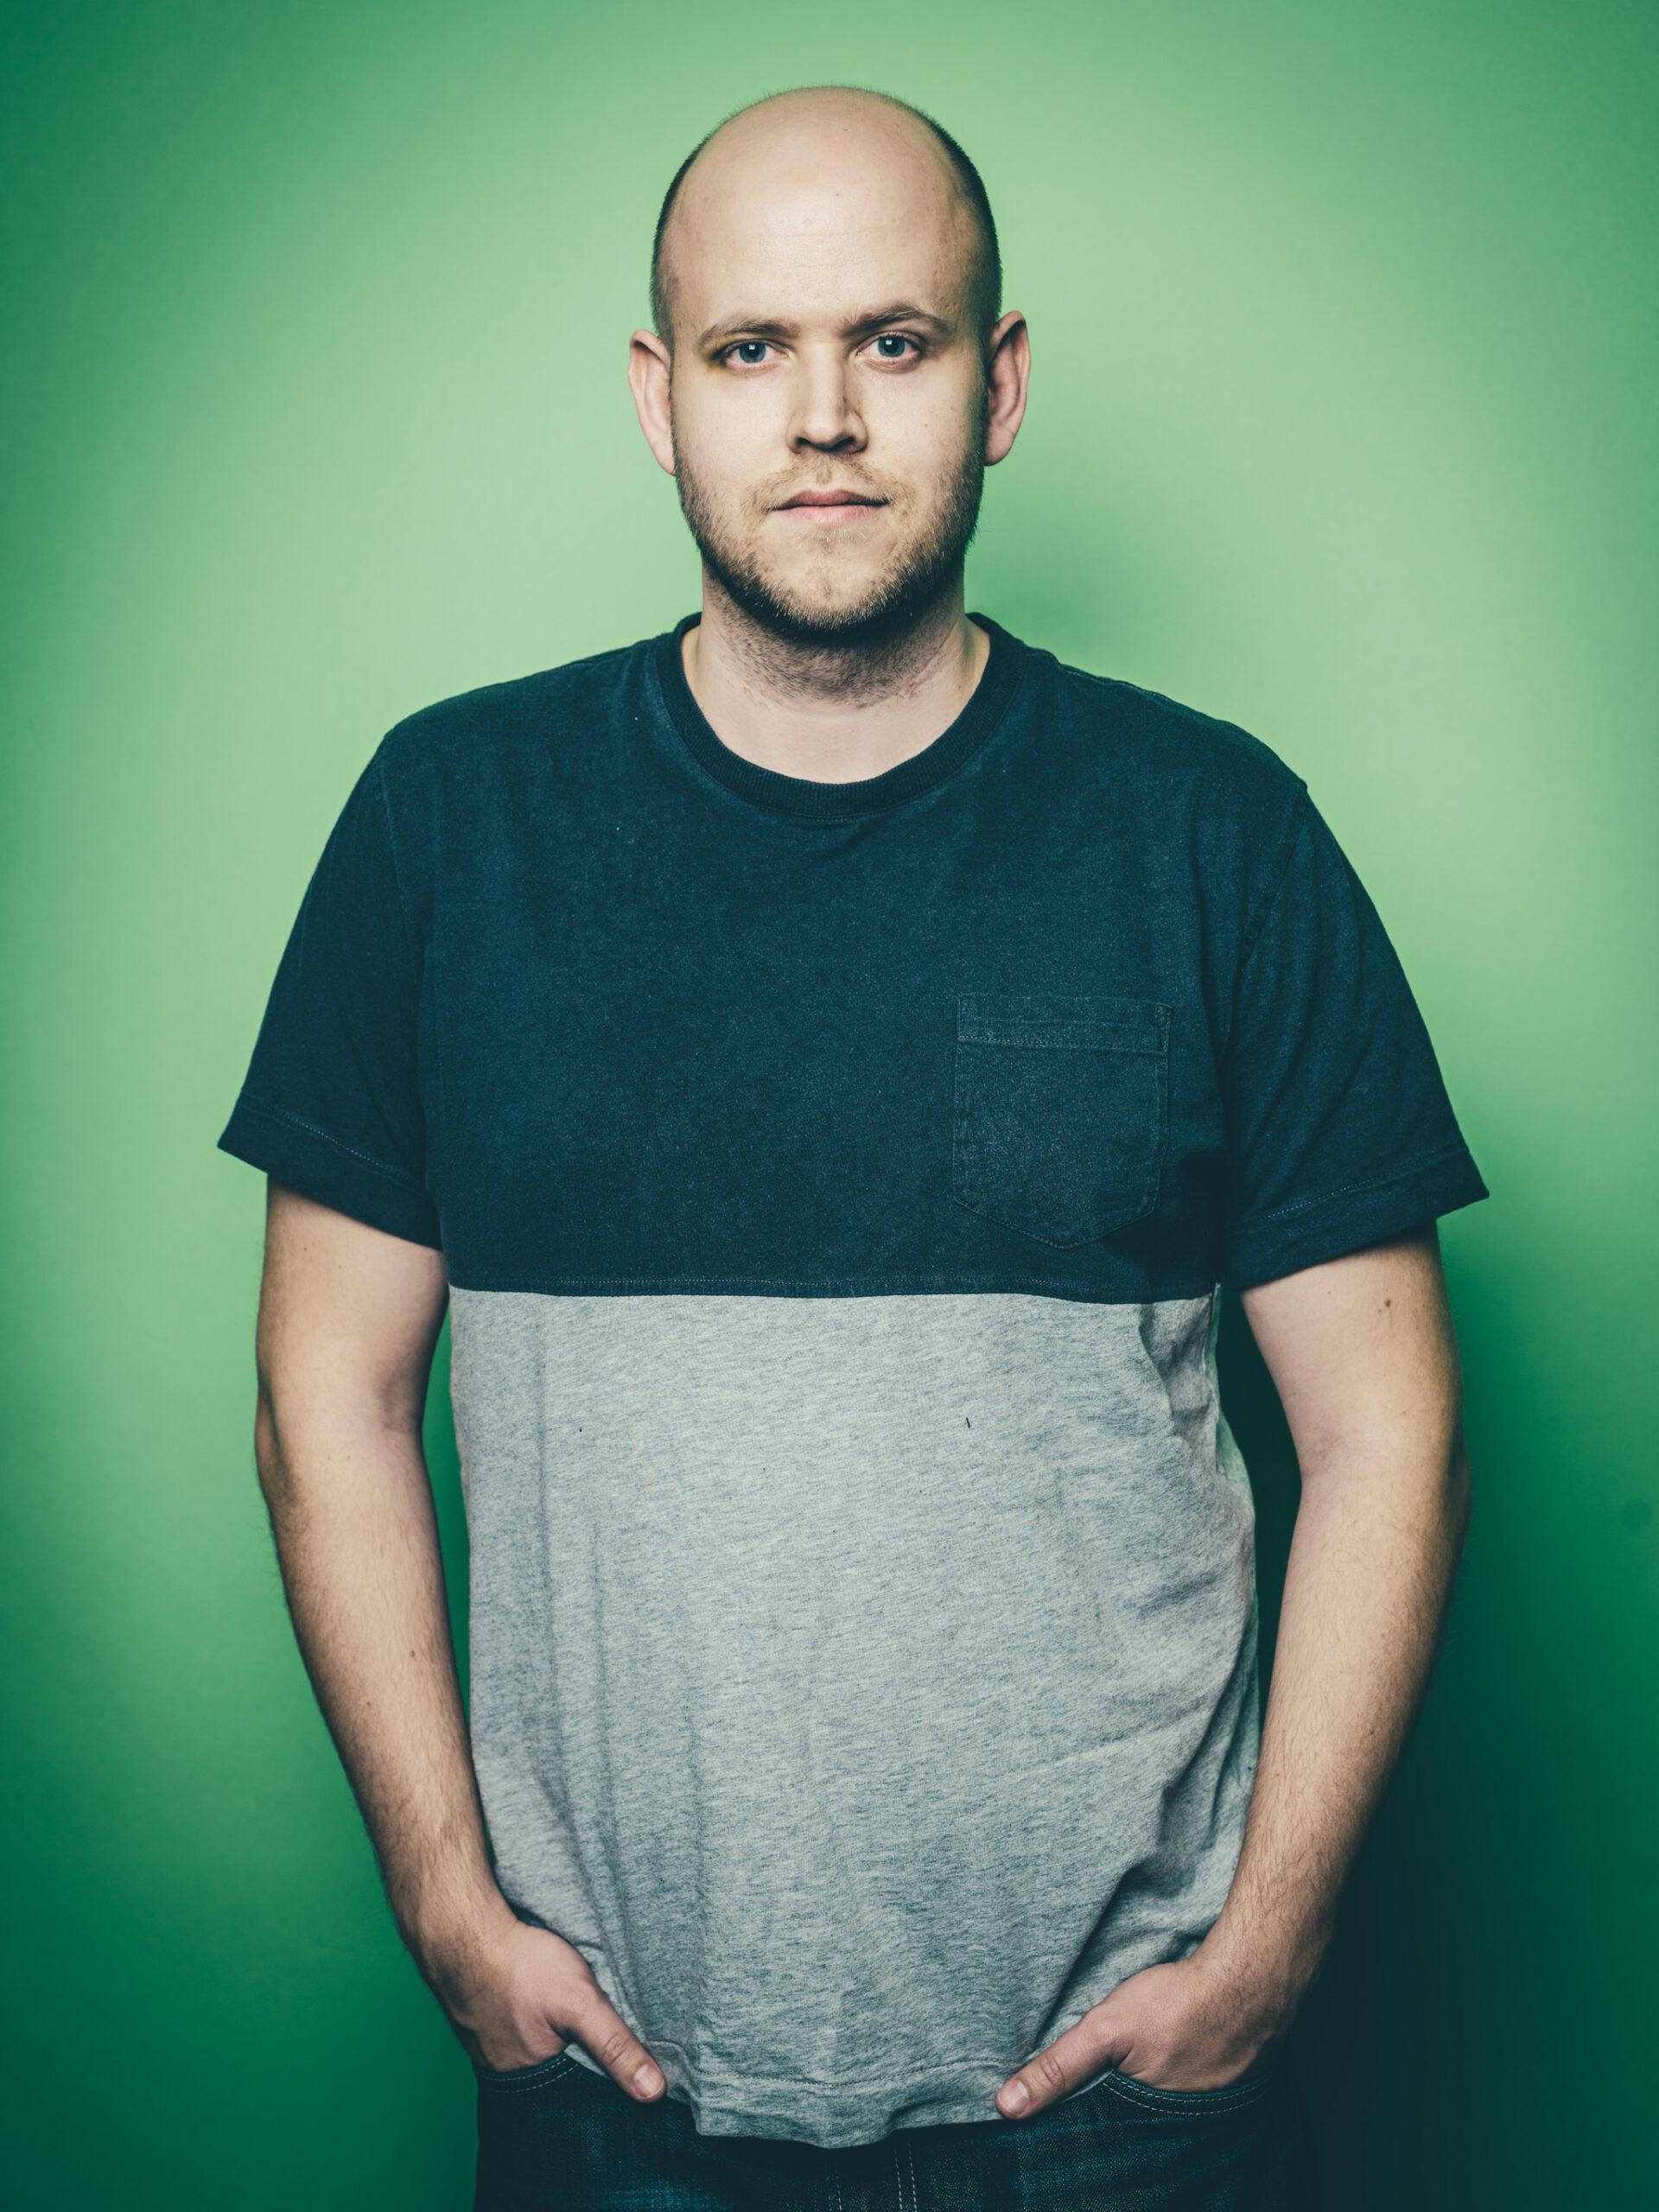 Portrait of Spotify founder Daniel Ek, standing with his hands in his pockets against a green background.